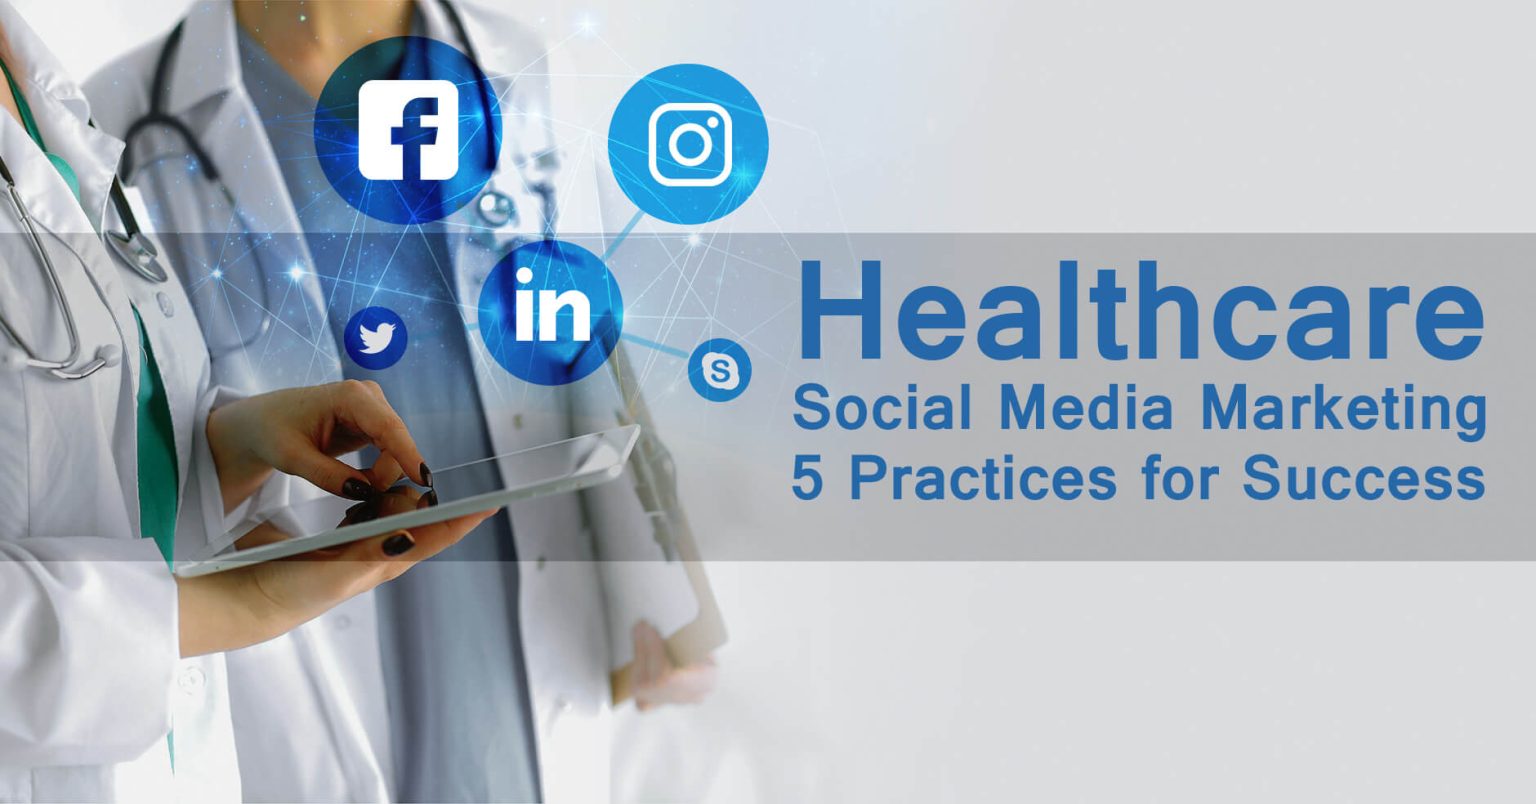 Healthcare Social Media Marketing – 5 Practices for Success